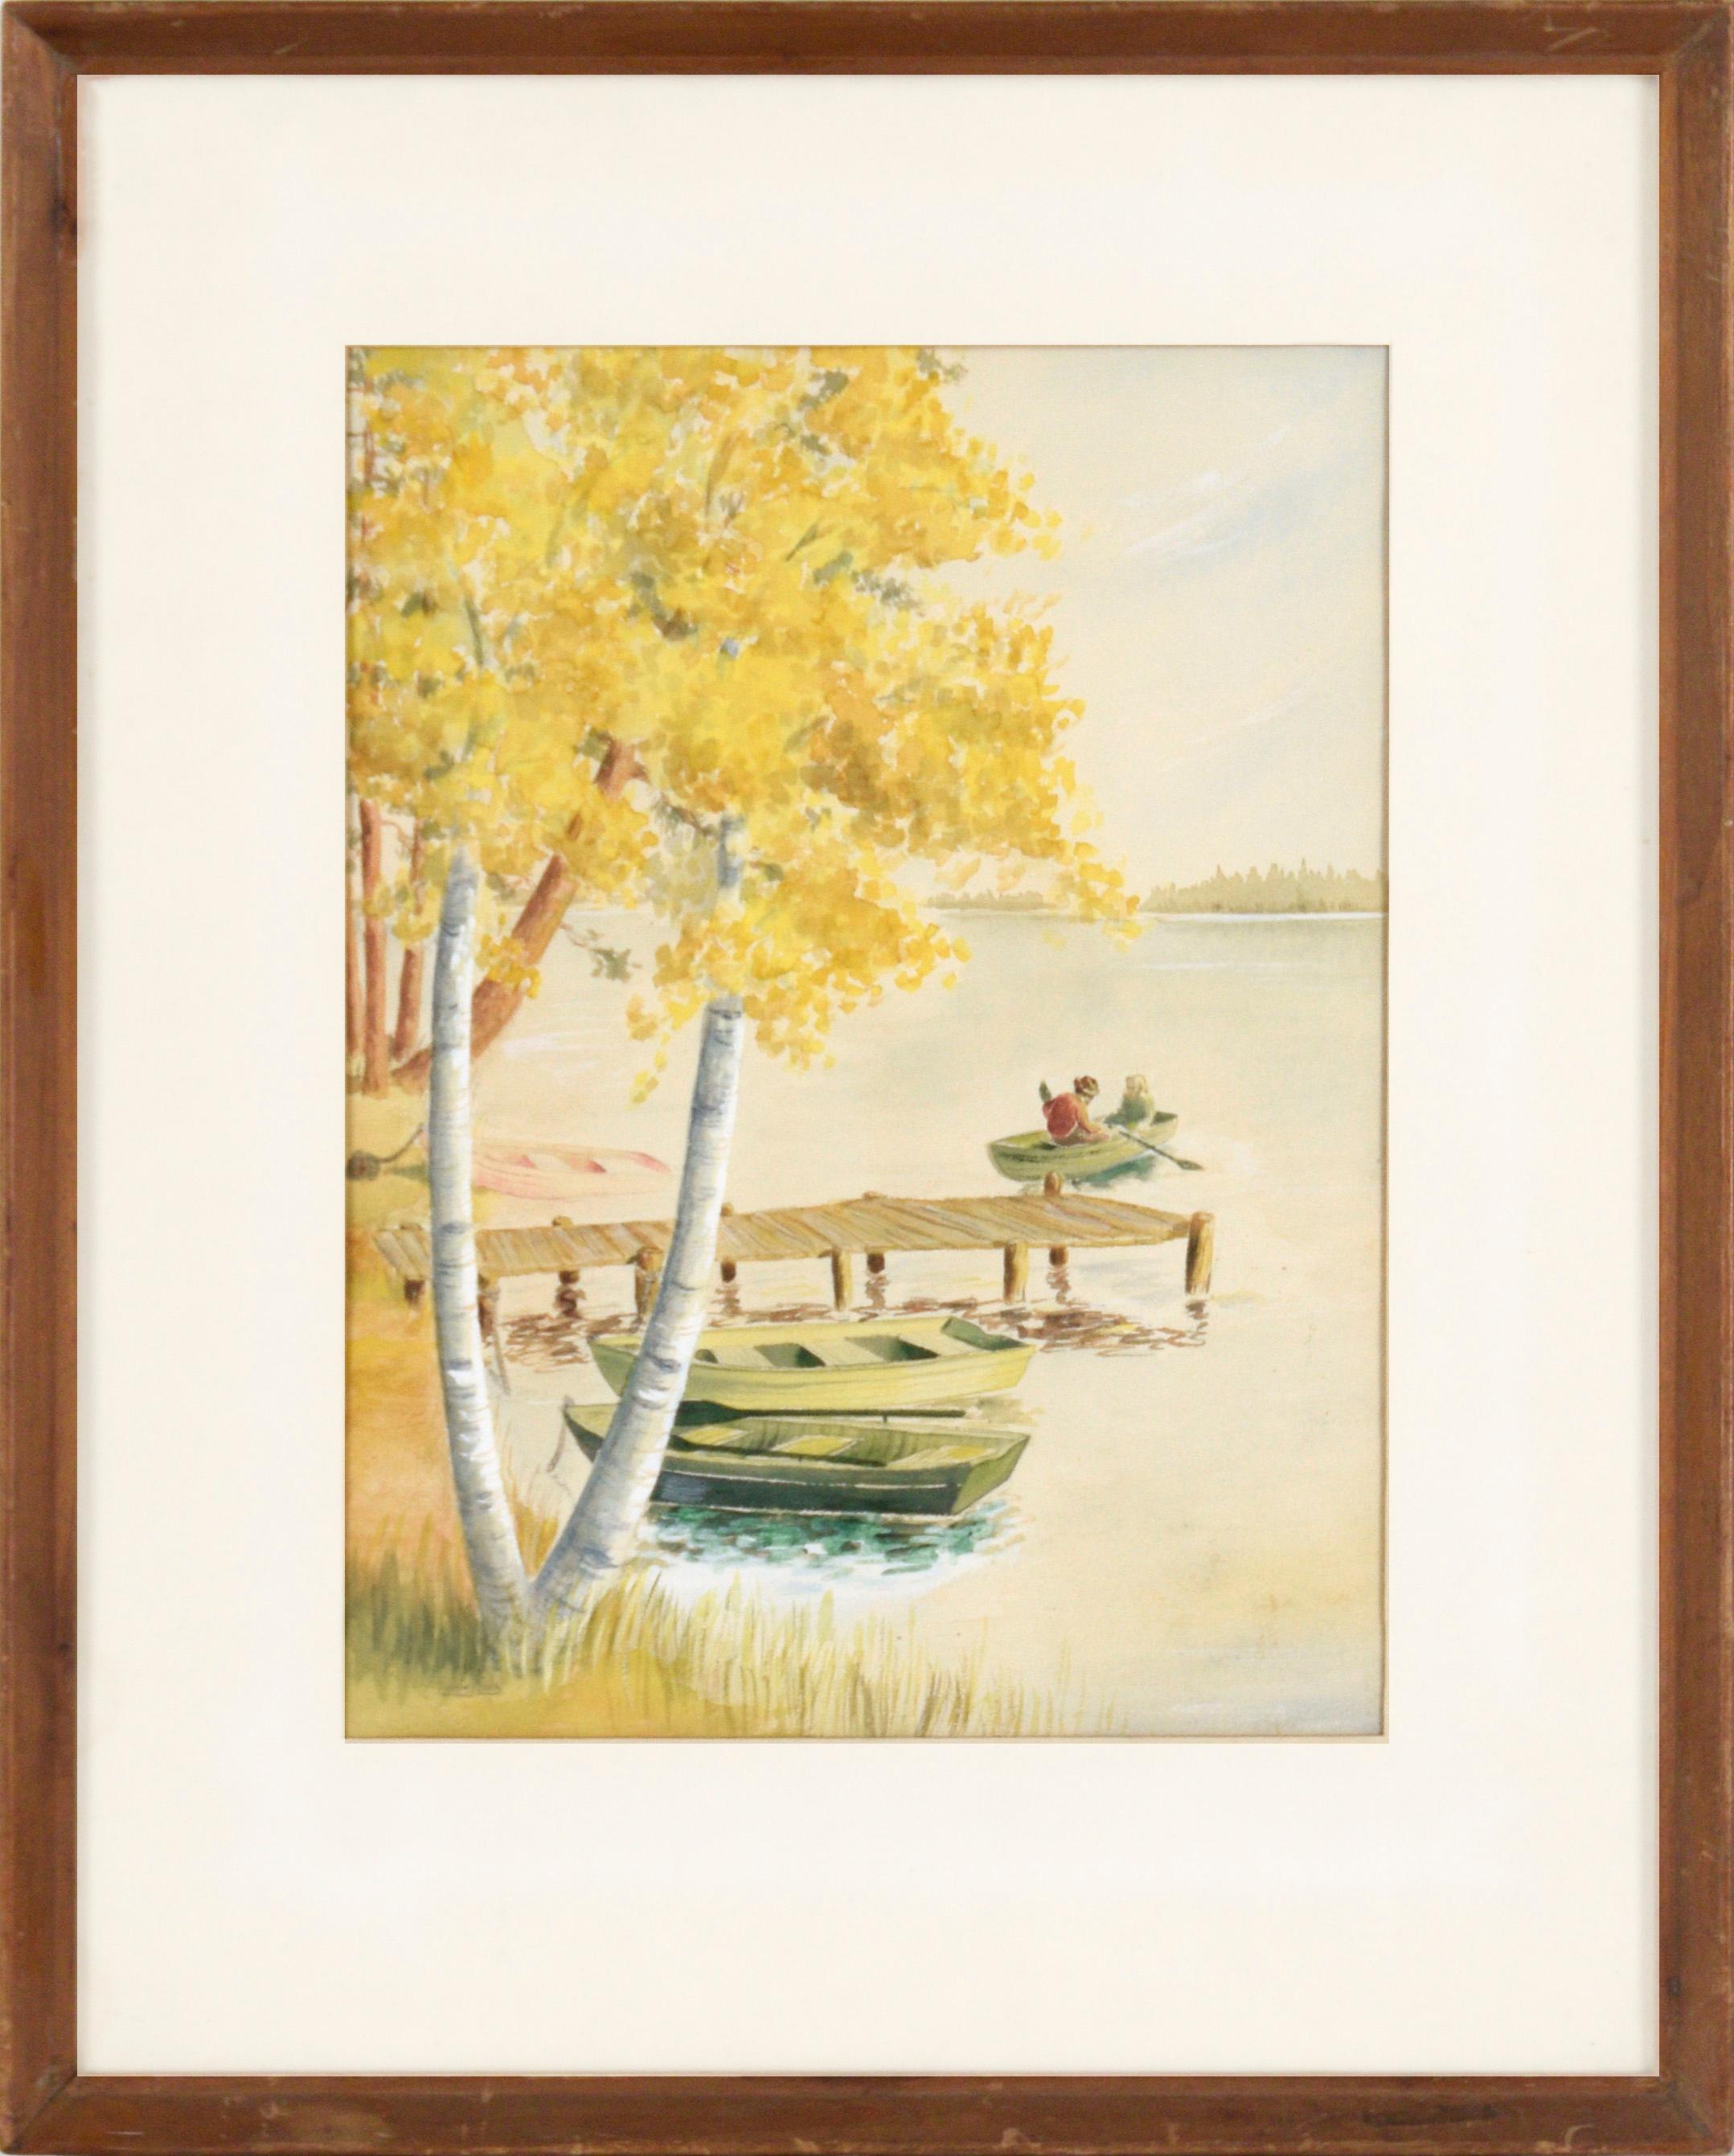 Rowboat Outing - Fall Landscape with Rowboats in Watercolor on Paper